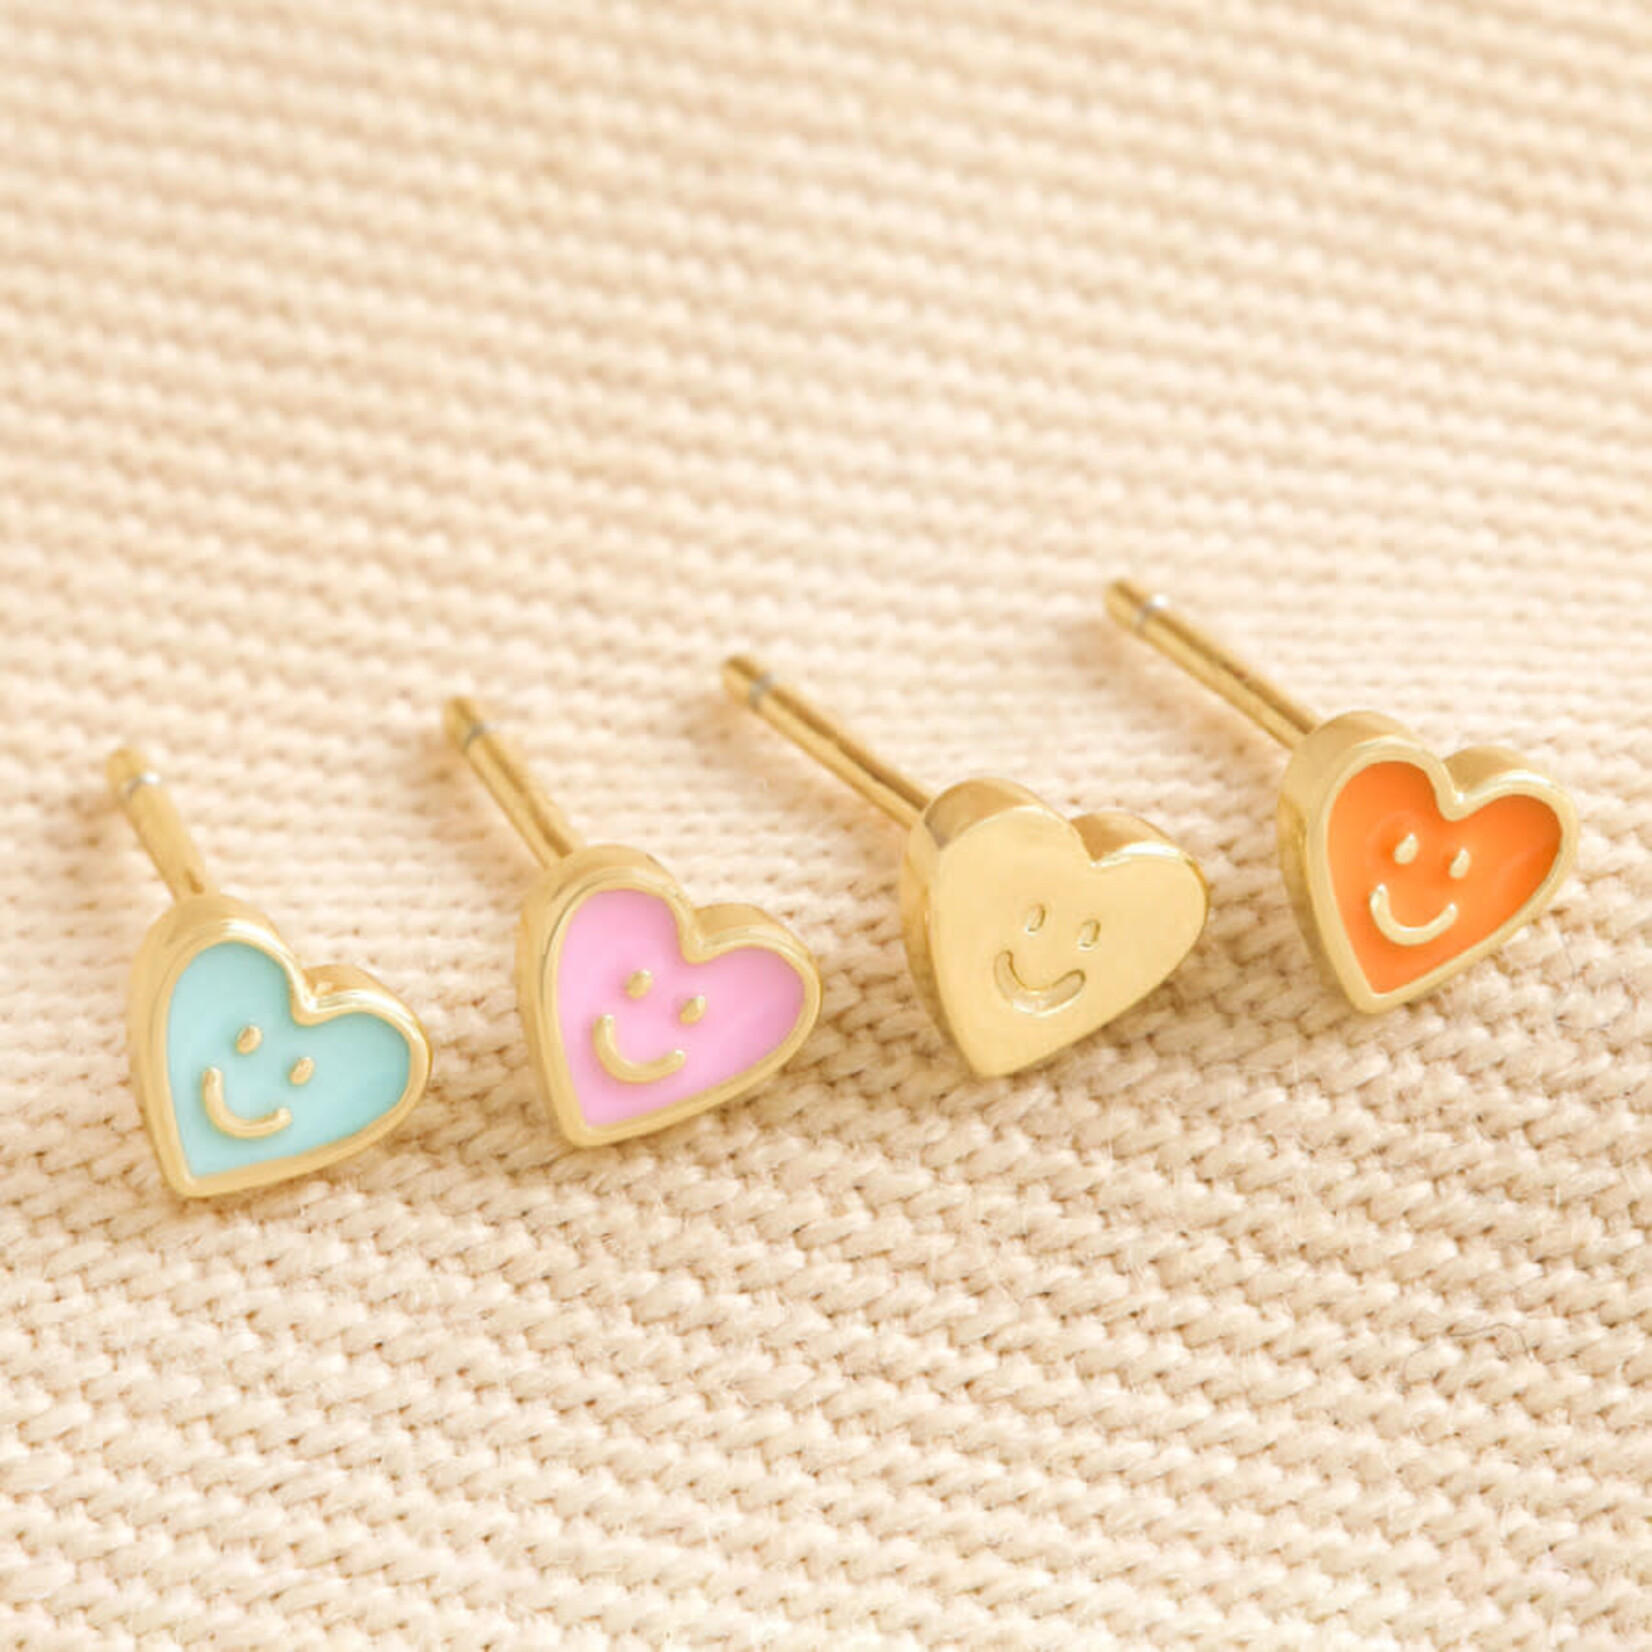 Lisa Angel Set of 4 Mismatched Heart Face Stud Earrings in Gold